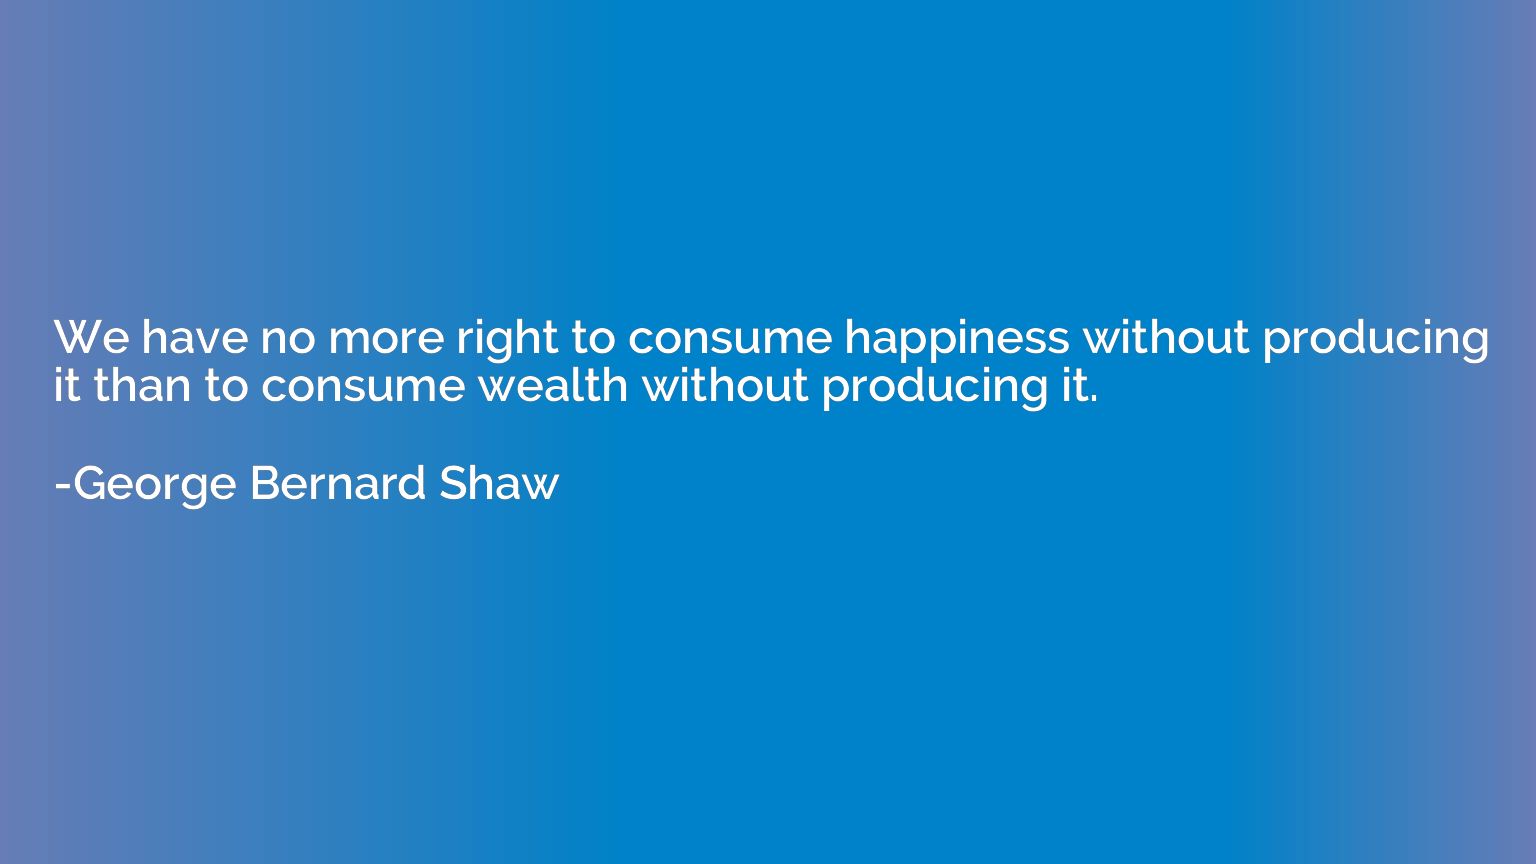 We have no more right to consume happiness without producing